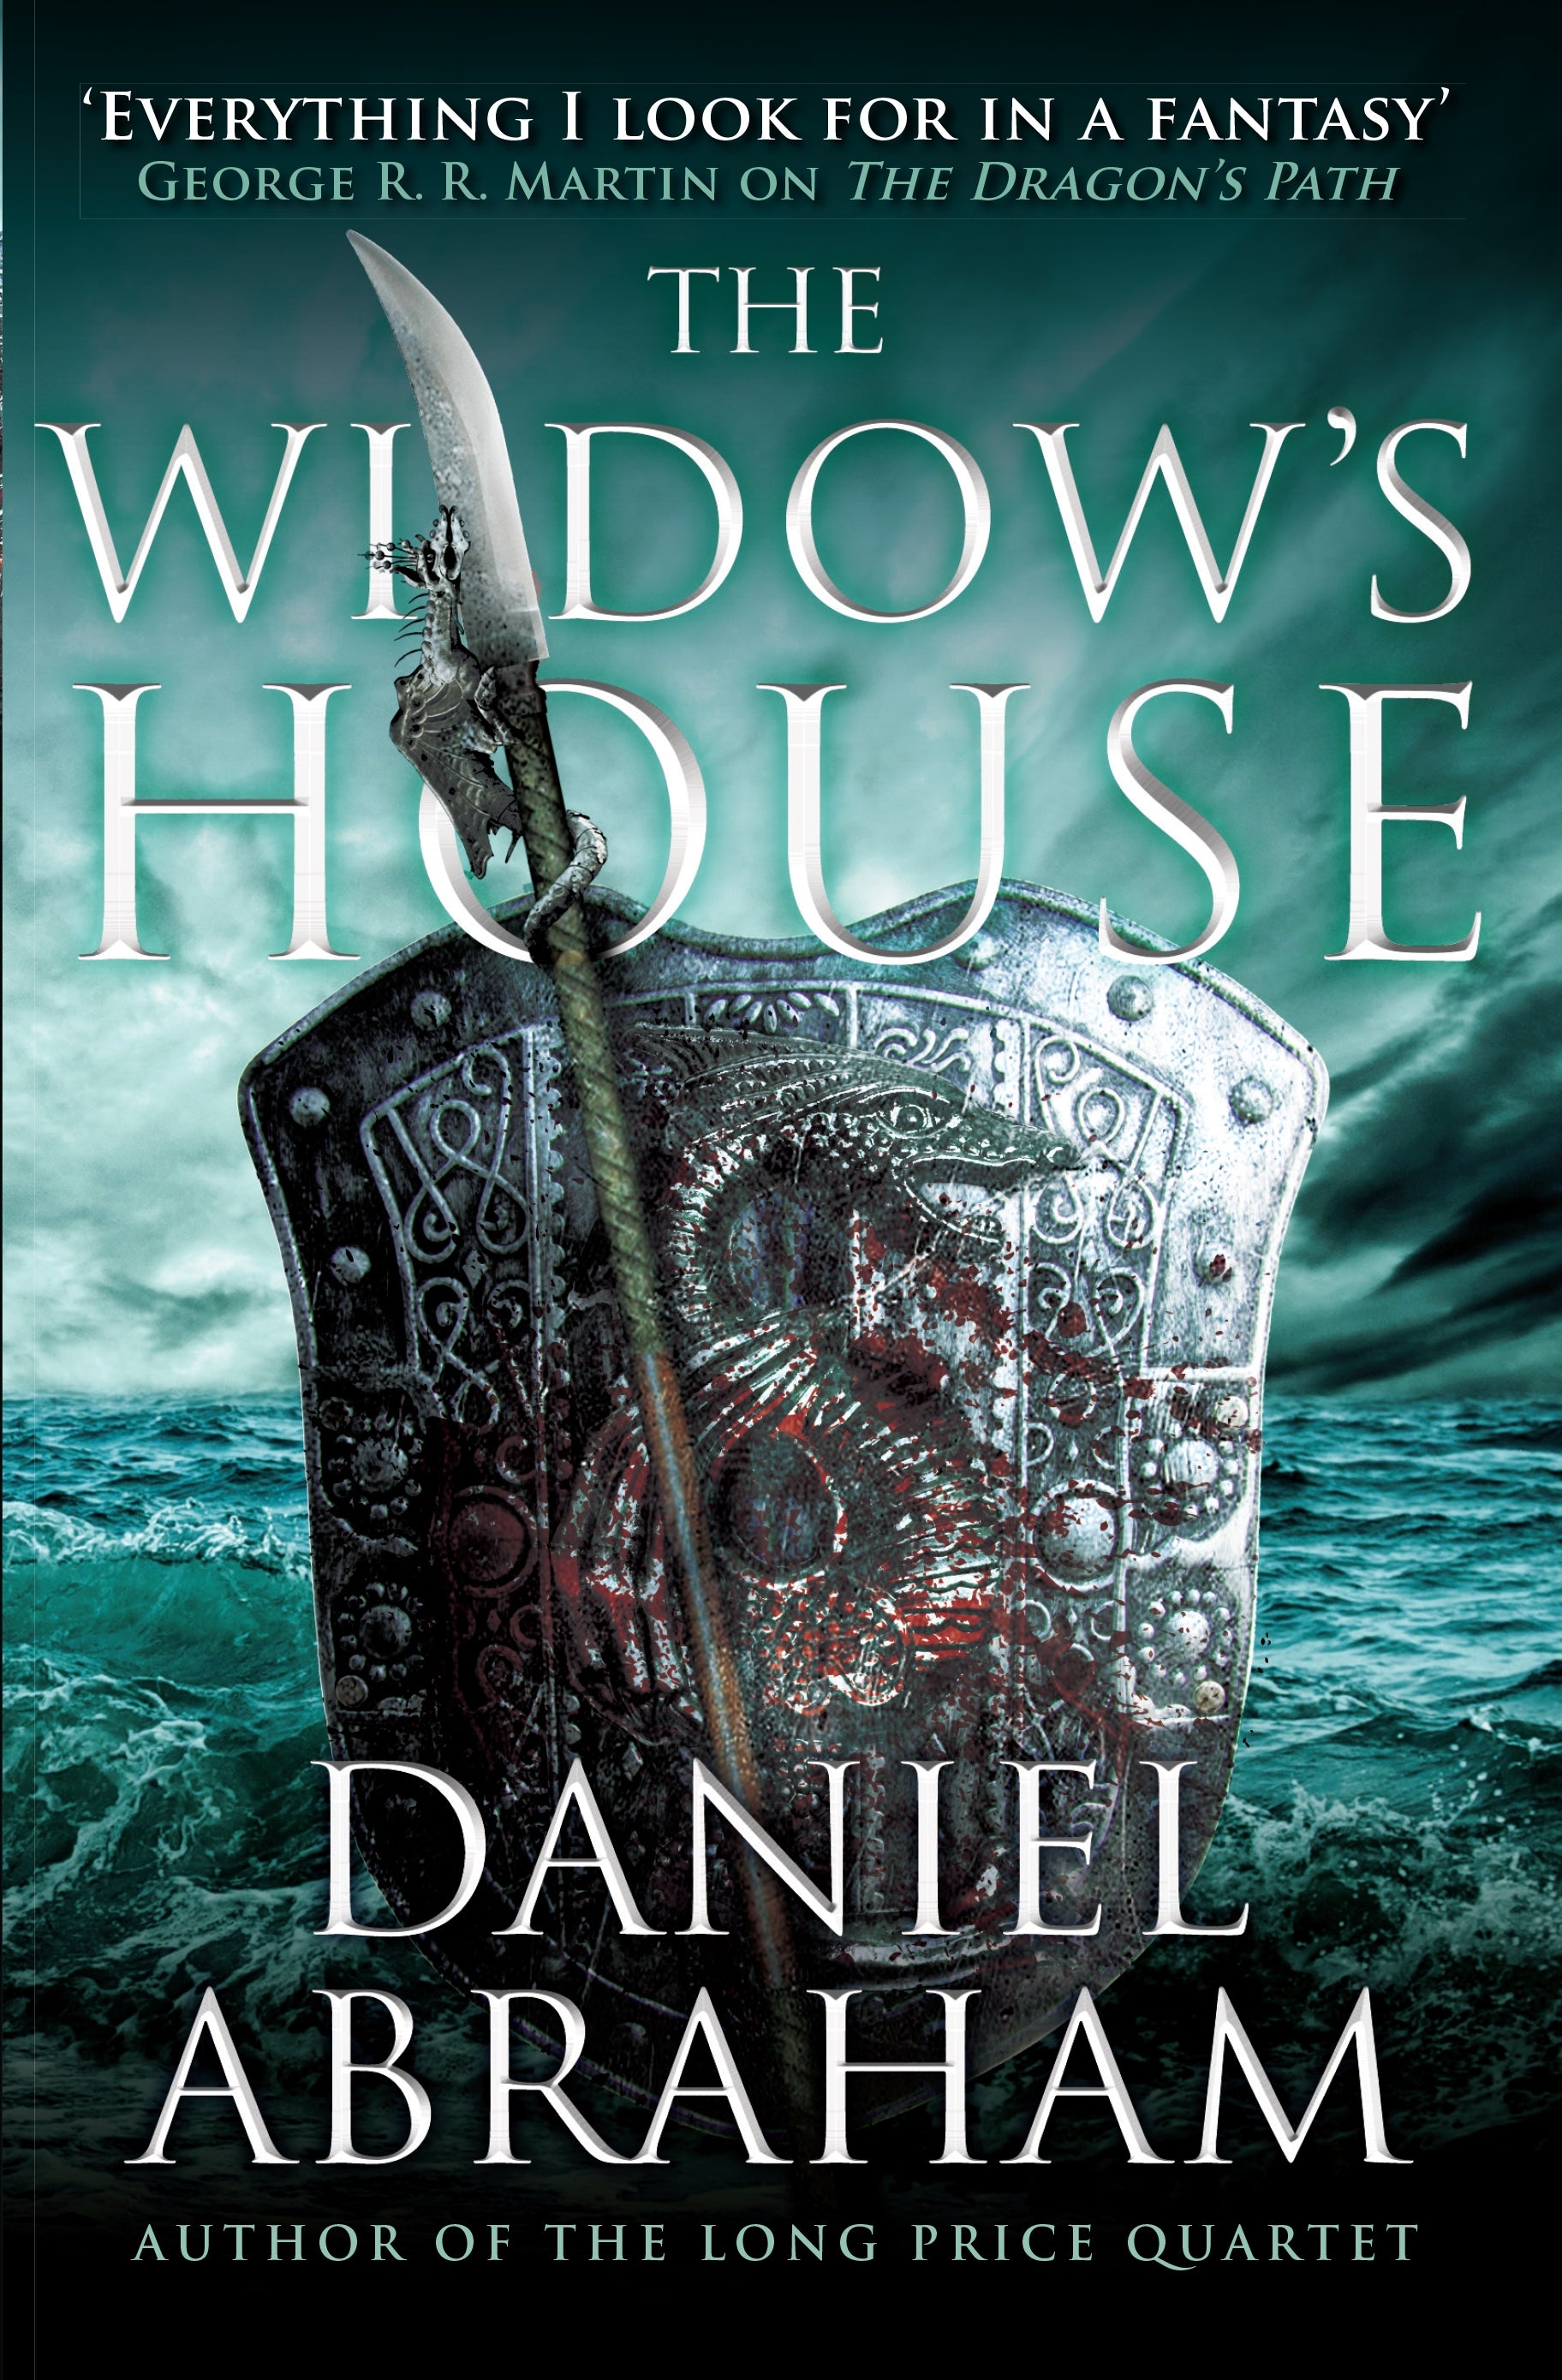 The Widow's House by Daniel Abraham